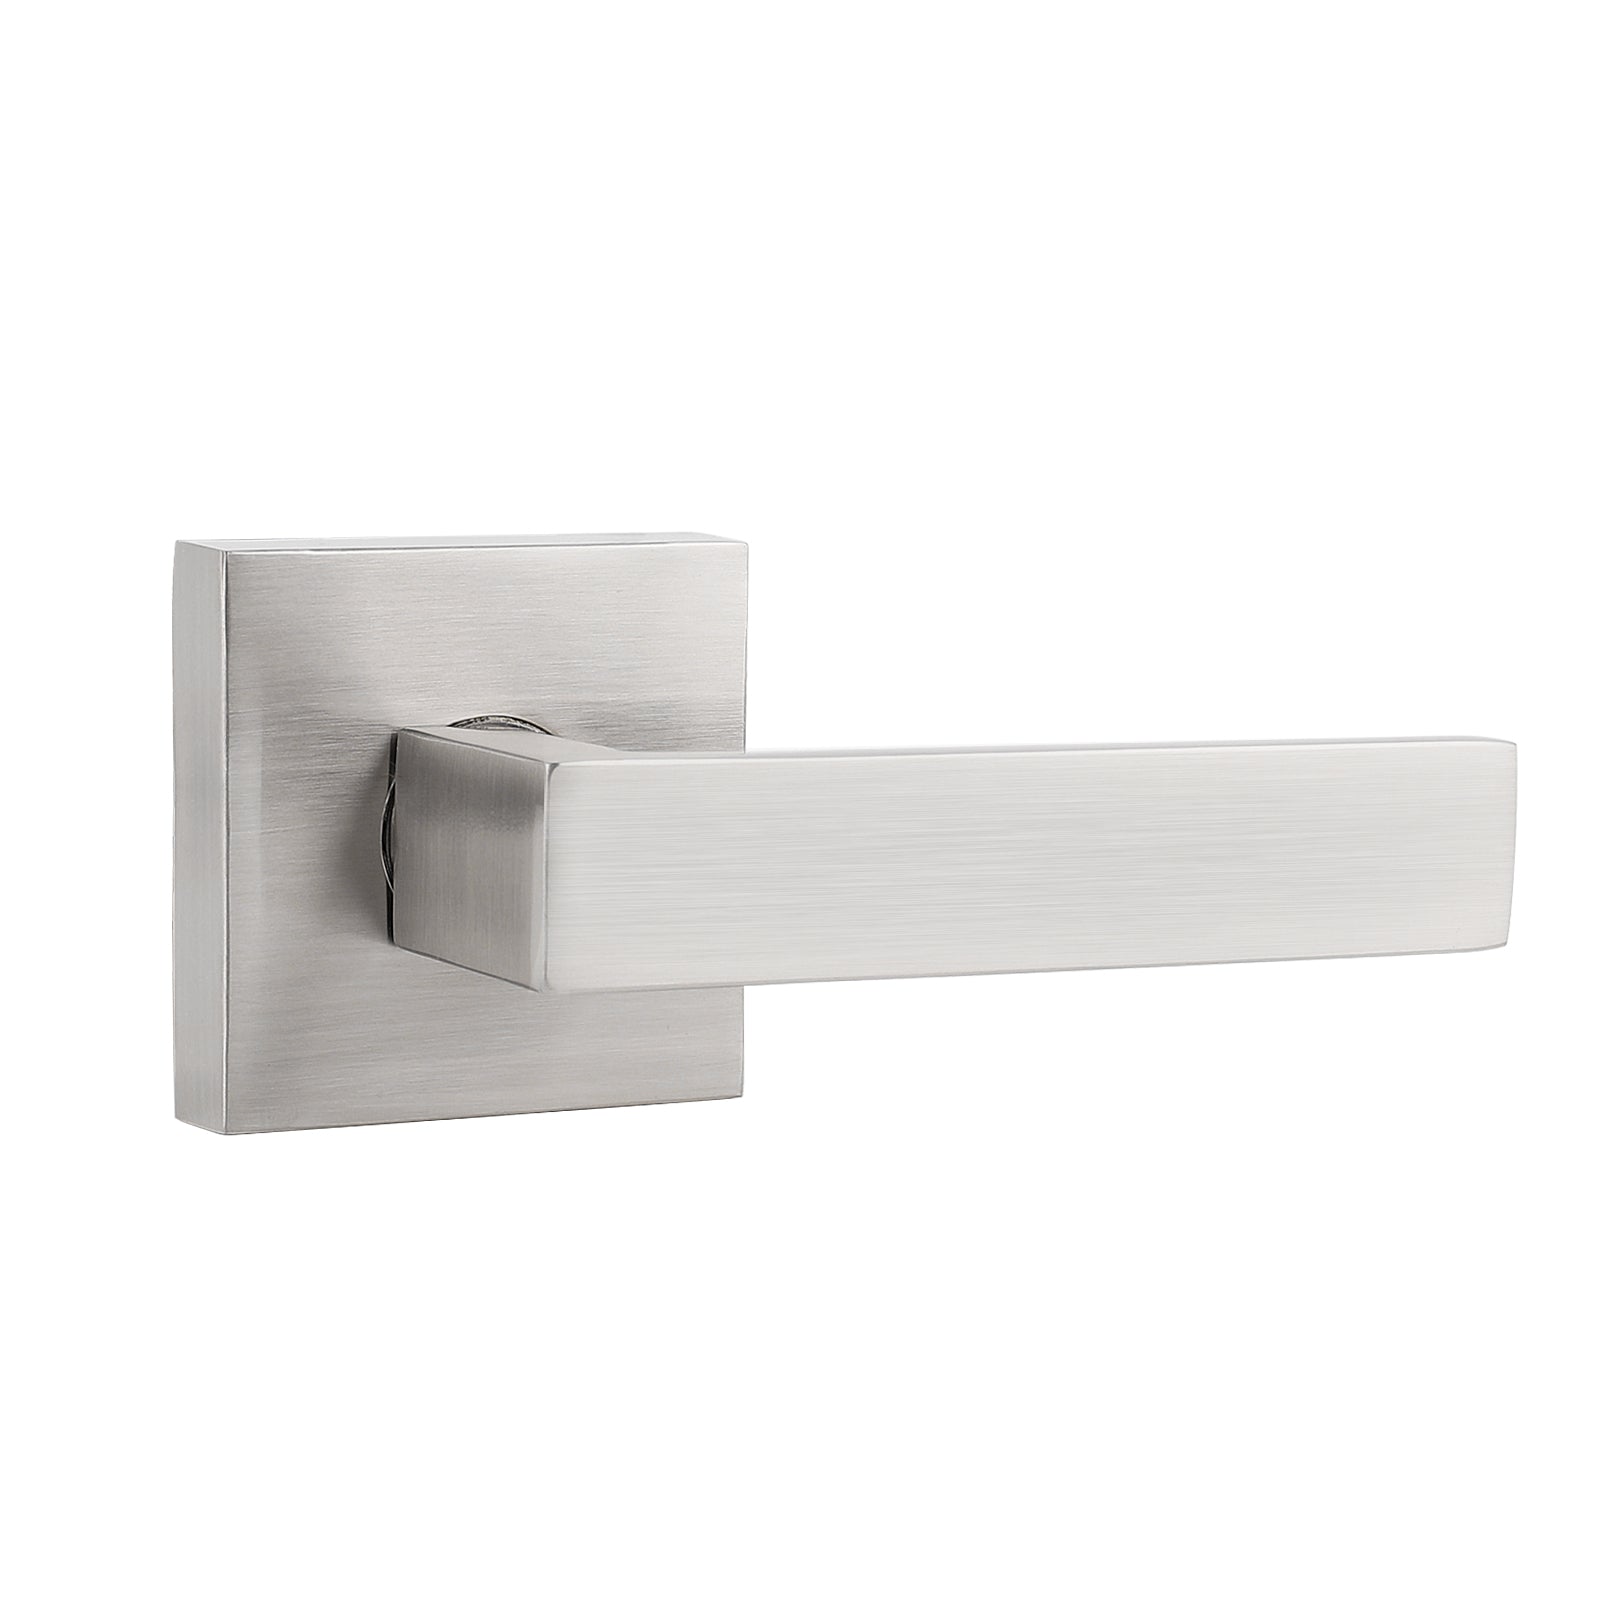 Single Dummy Door Lever Handle with Square Rosette, Brushed Nickel Finish DL01SNDM